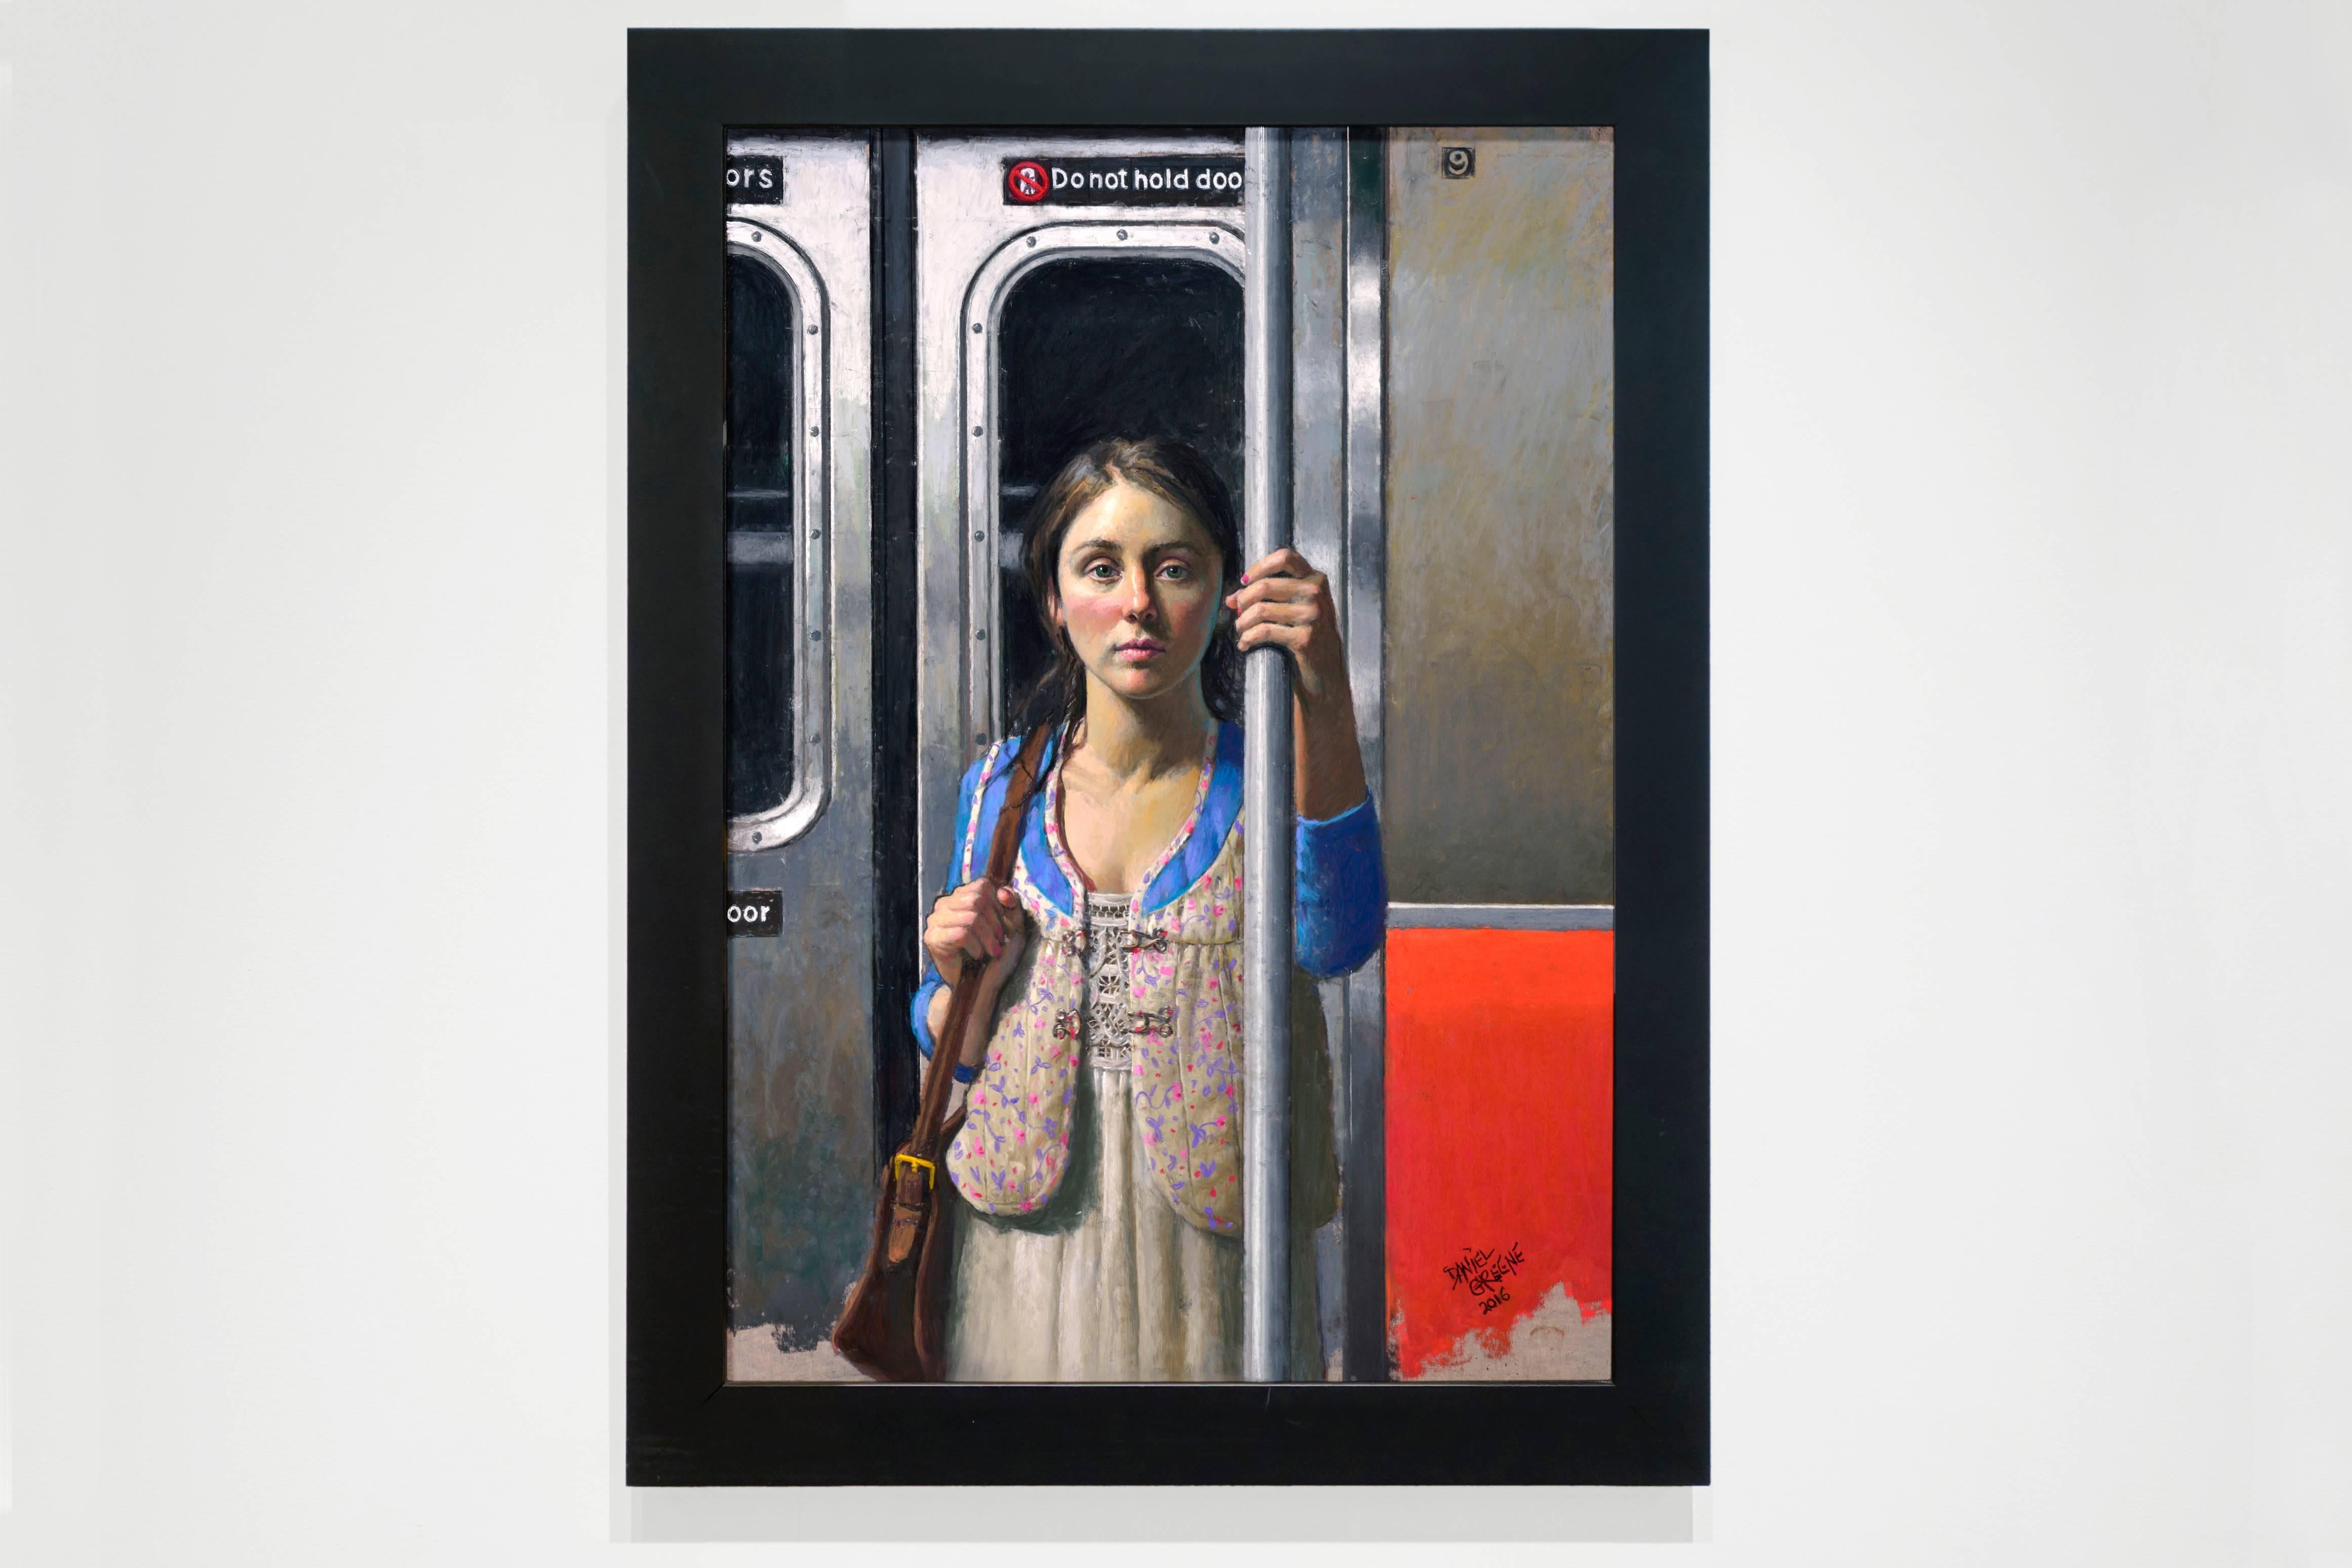 SOPHIE IN TRANSIT, photo-realism, portrait, nyc subway, woman on train, blue - Painting by Daniel Greene